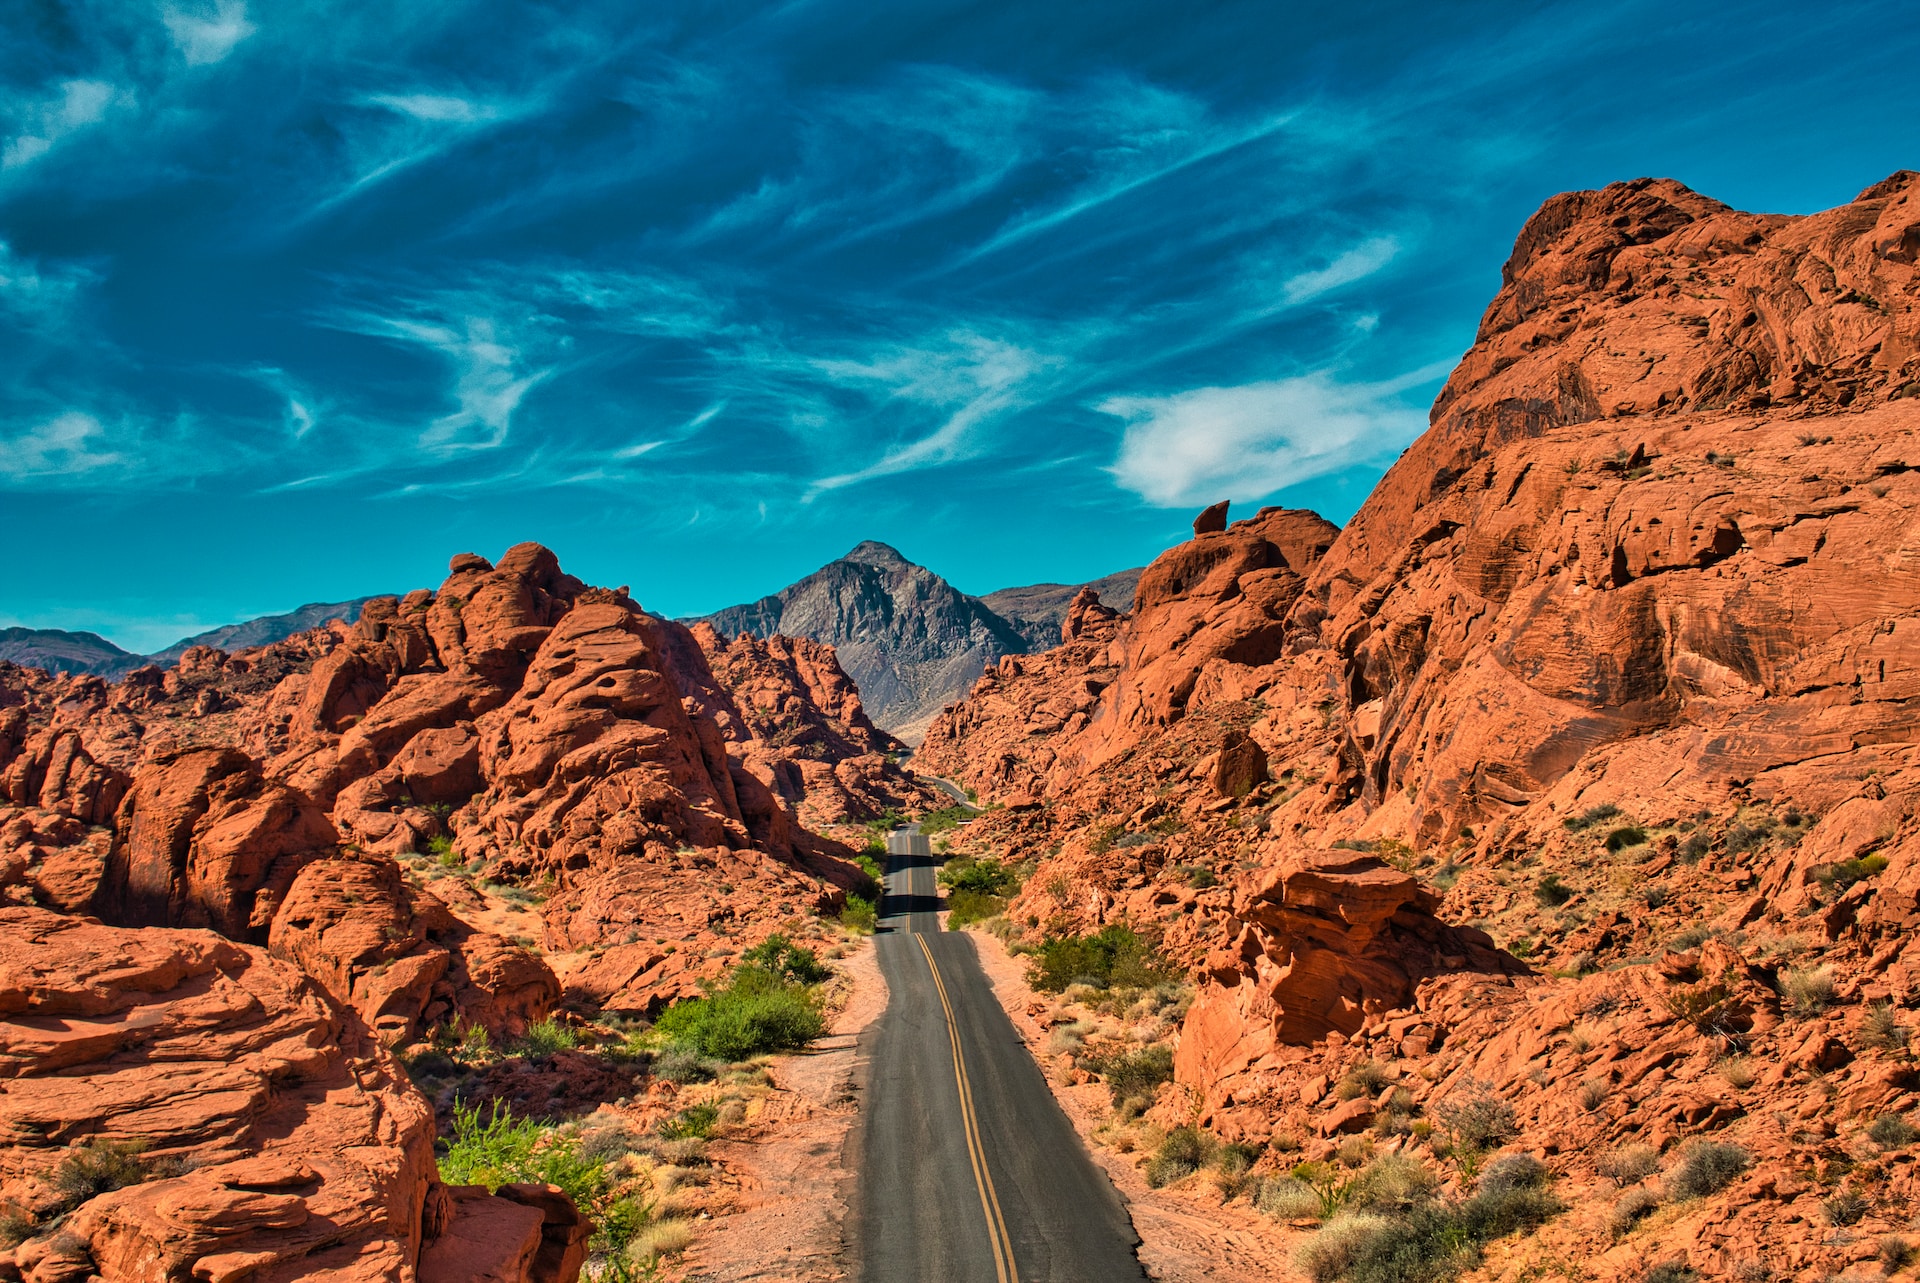 Nevada has a vast road network that traverses through some dramatic landscapes as well.